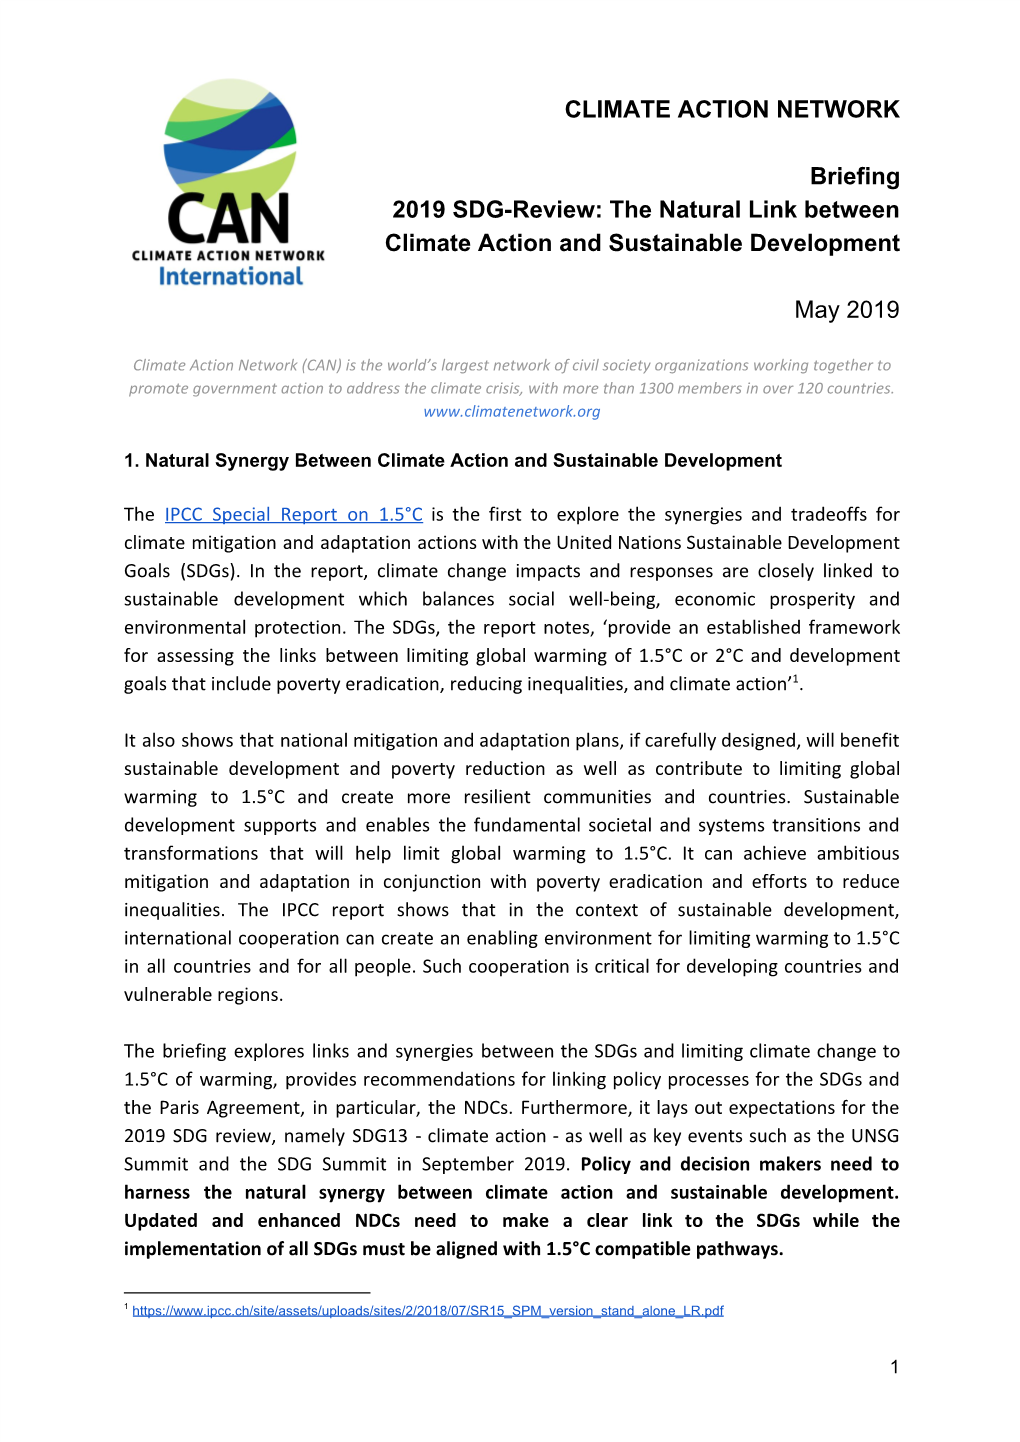 CLIMATE ACTION NETWORK Briefing 2019 SDG-Review: the Natural